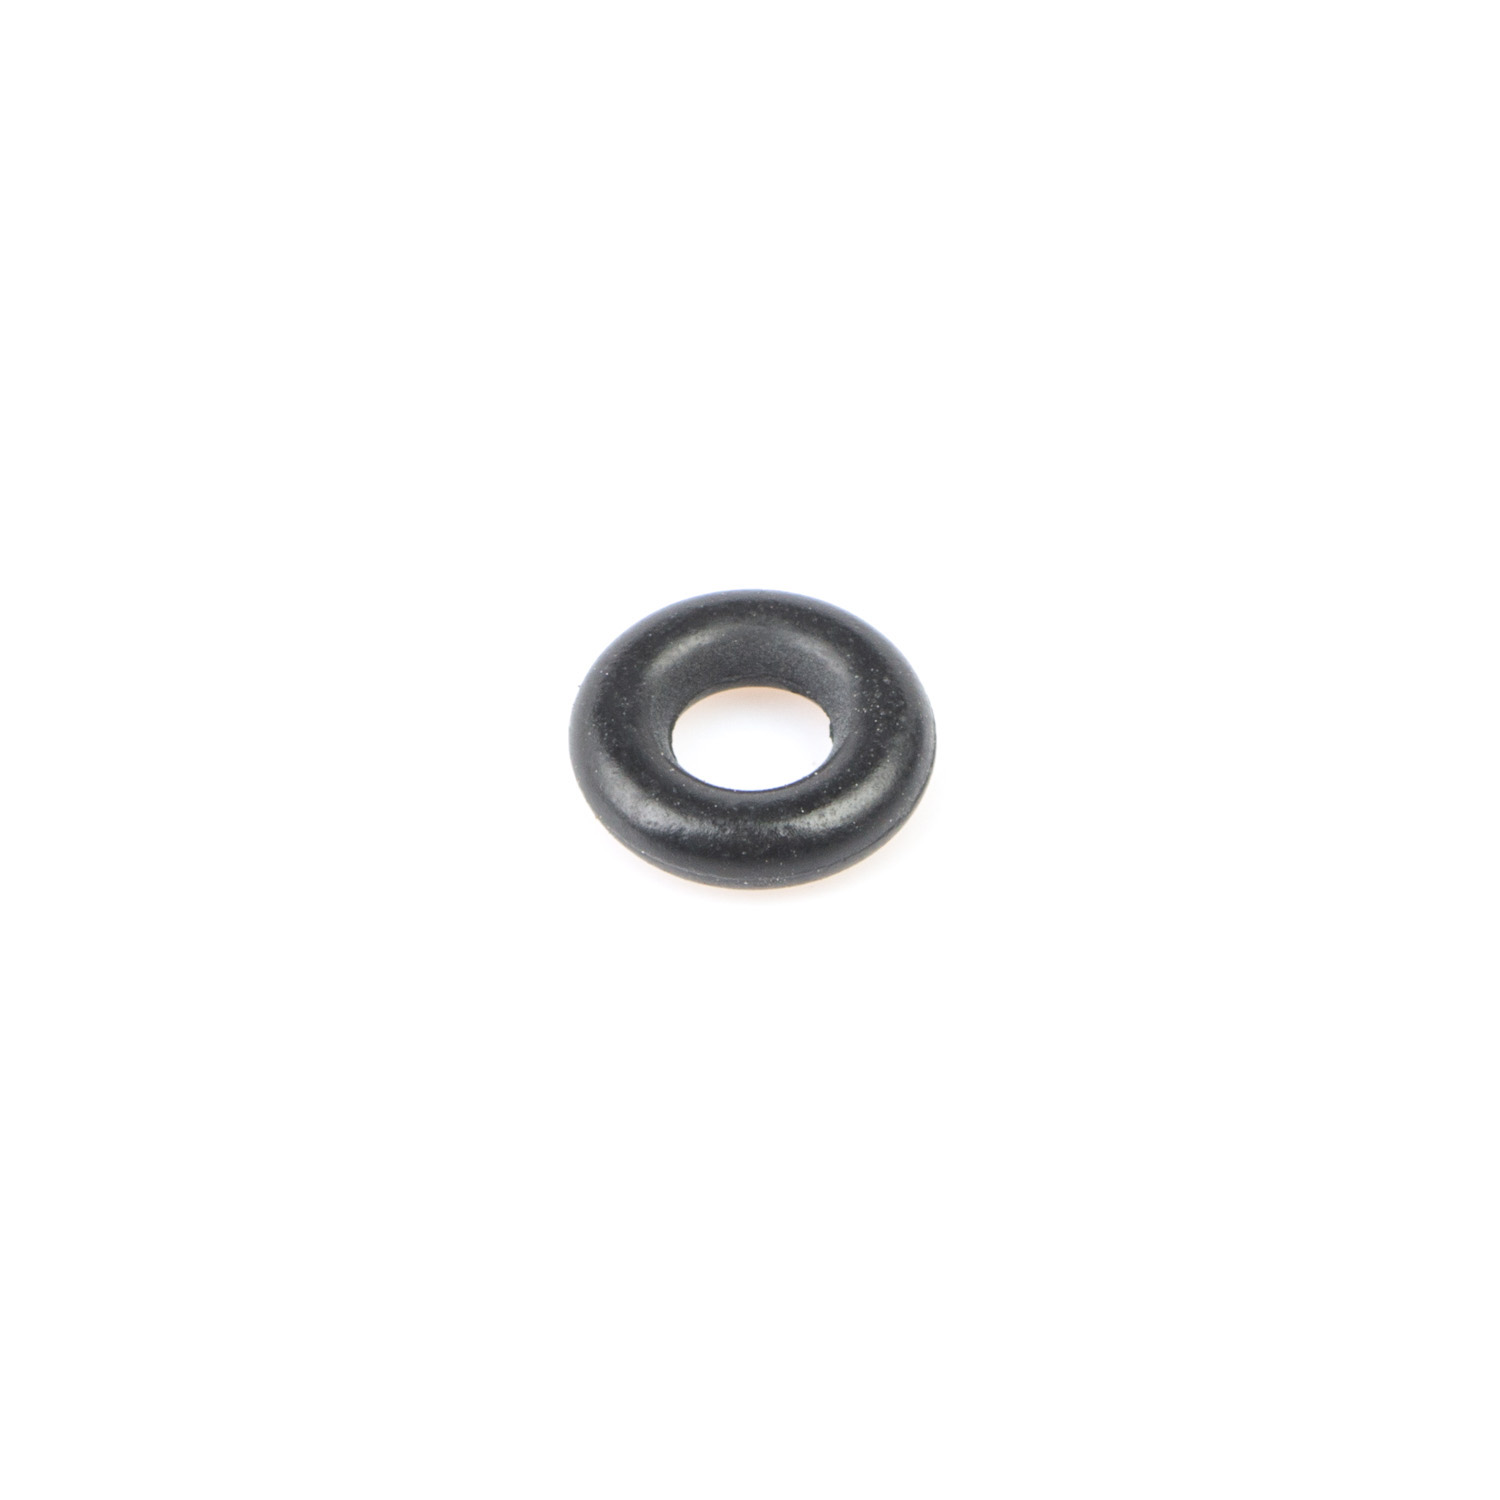 DT250 USA (Twinshock) Carb Idle Screw O-Ring